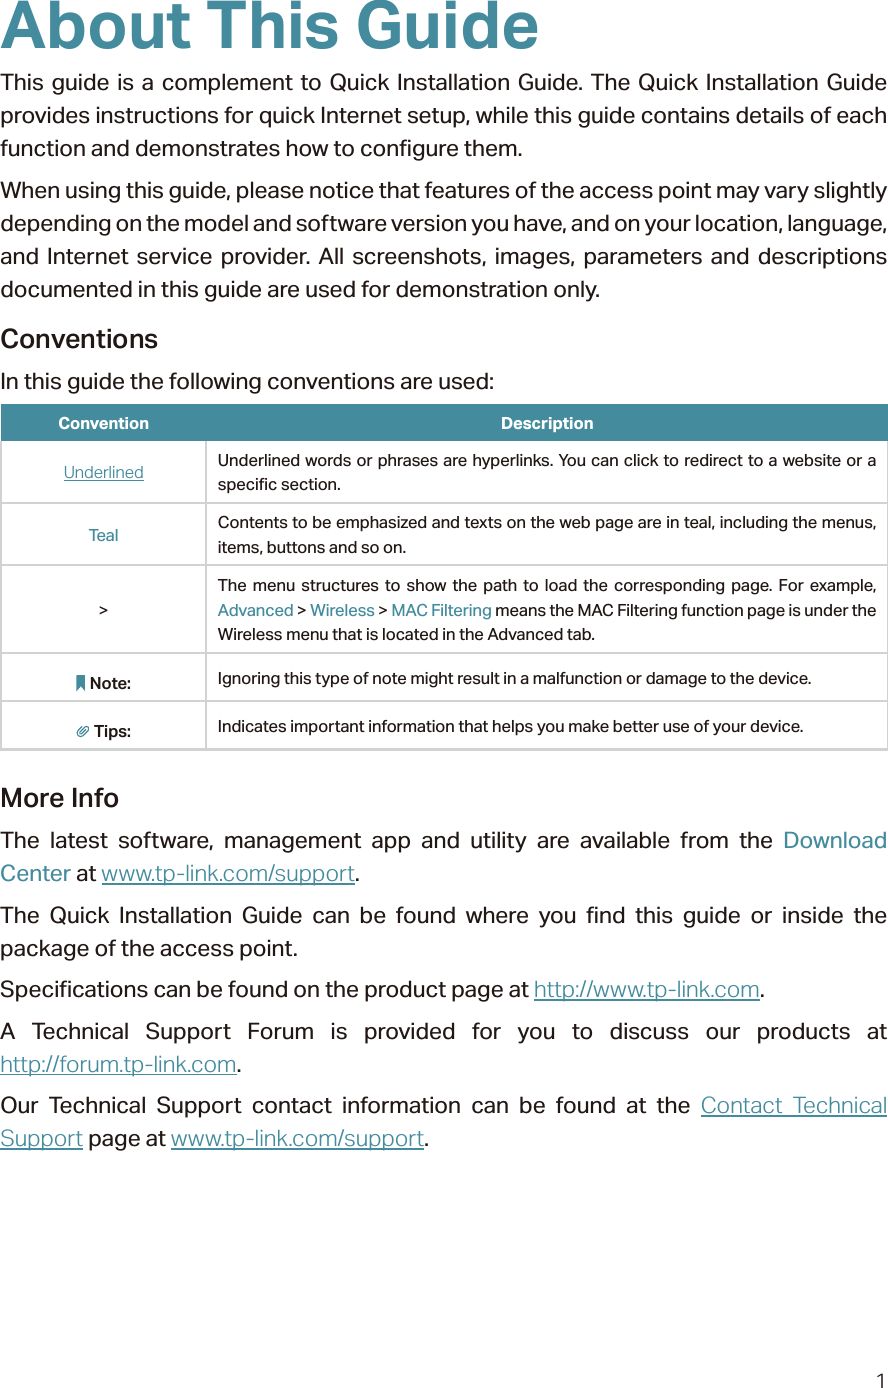 1About This GuideThis guide is a complement to Quick Installation Guide. The Quick Installation Guide provides instructions for quick Internet setup, while this guide contains details of each function and demonstrates how to configure them. When using this guide, please notice that features of the access point may vary slightly depending on the model and software version you have, and on your location, language, and Internet service provider. All screenshots, images, parameters and descriptions documented in this guide are used for demonstration only.ConventionsIn this guide the following conventions are used:Convention DescriptionUnderlined Underlined words or phrases are hyperlinks. You can click to redirect to a website or a specific section.Teal Contents to be emphasized and texts on the web page are in teal, including the menus, items, buttons and so on.&gt;The menu structures to show the path to load the corresponding page. For example, Advanced &gt; Wireless &gt; MAC Filtering means the MAC Filtering function page is under the Wireless menu that is located in the Advanced tab.Note: Ignoring this type of note might result in a malfunction or damage to the device.Tips: Indicates important information that helps you make better use of your device.More InfoThe latest software, management app and utility are available from the Download Center at www.tp-link.com/support.The Quick Installation Guide can be found where you find this guide or inside the package of the access point.Specifications can be found on the product page at http://www.tp-link.com.A Technical Support Forum is provided for you to discuss our products at  http://forum.tp-link.com.Our Technical Support contact information can be found at the Contact Technical Support page at www.tp-link.com/support.